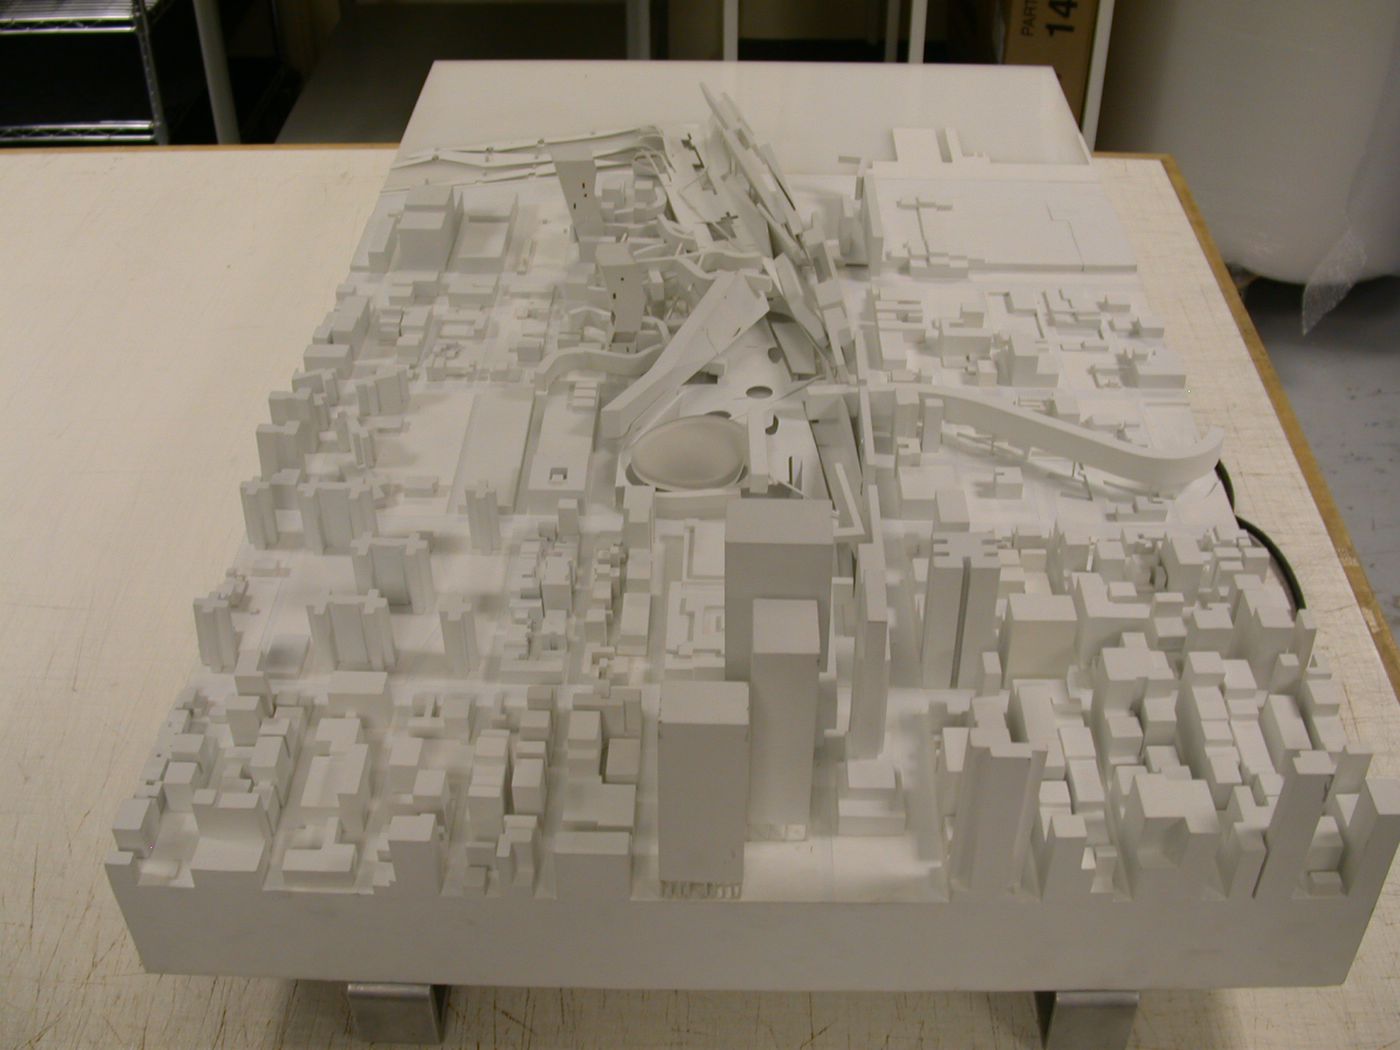 Model of proposed redevelopment for the western edge of Manhattan submitted to the FICCA Prize Competition for the Design of Cities, 1999